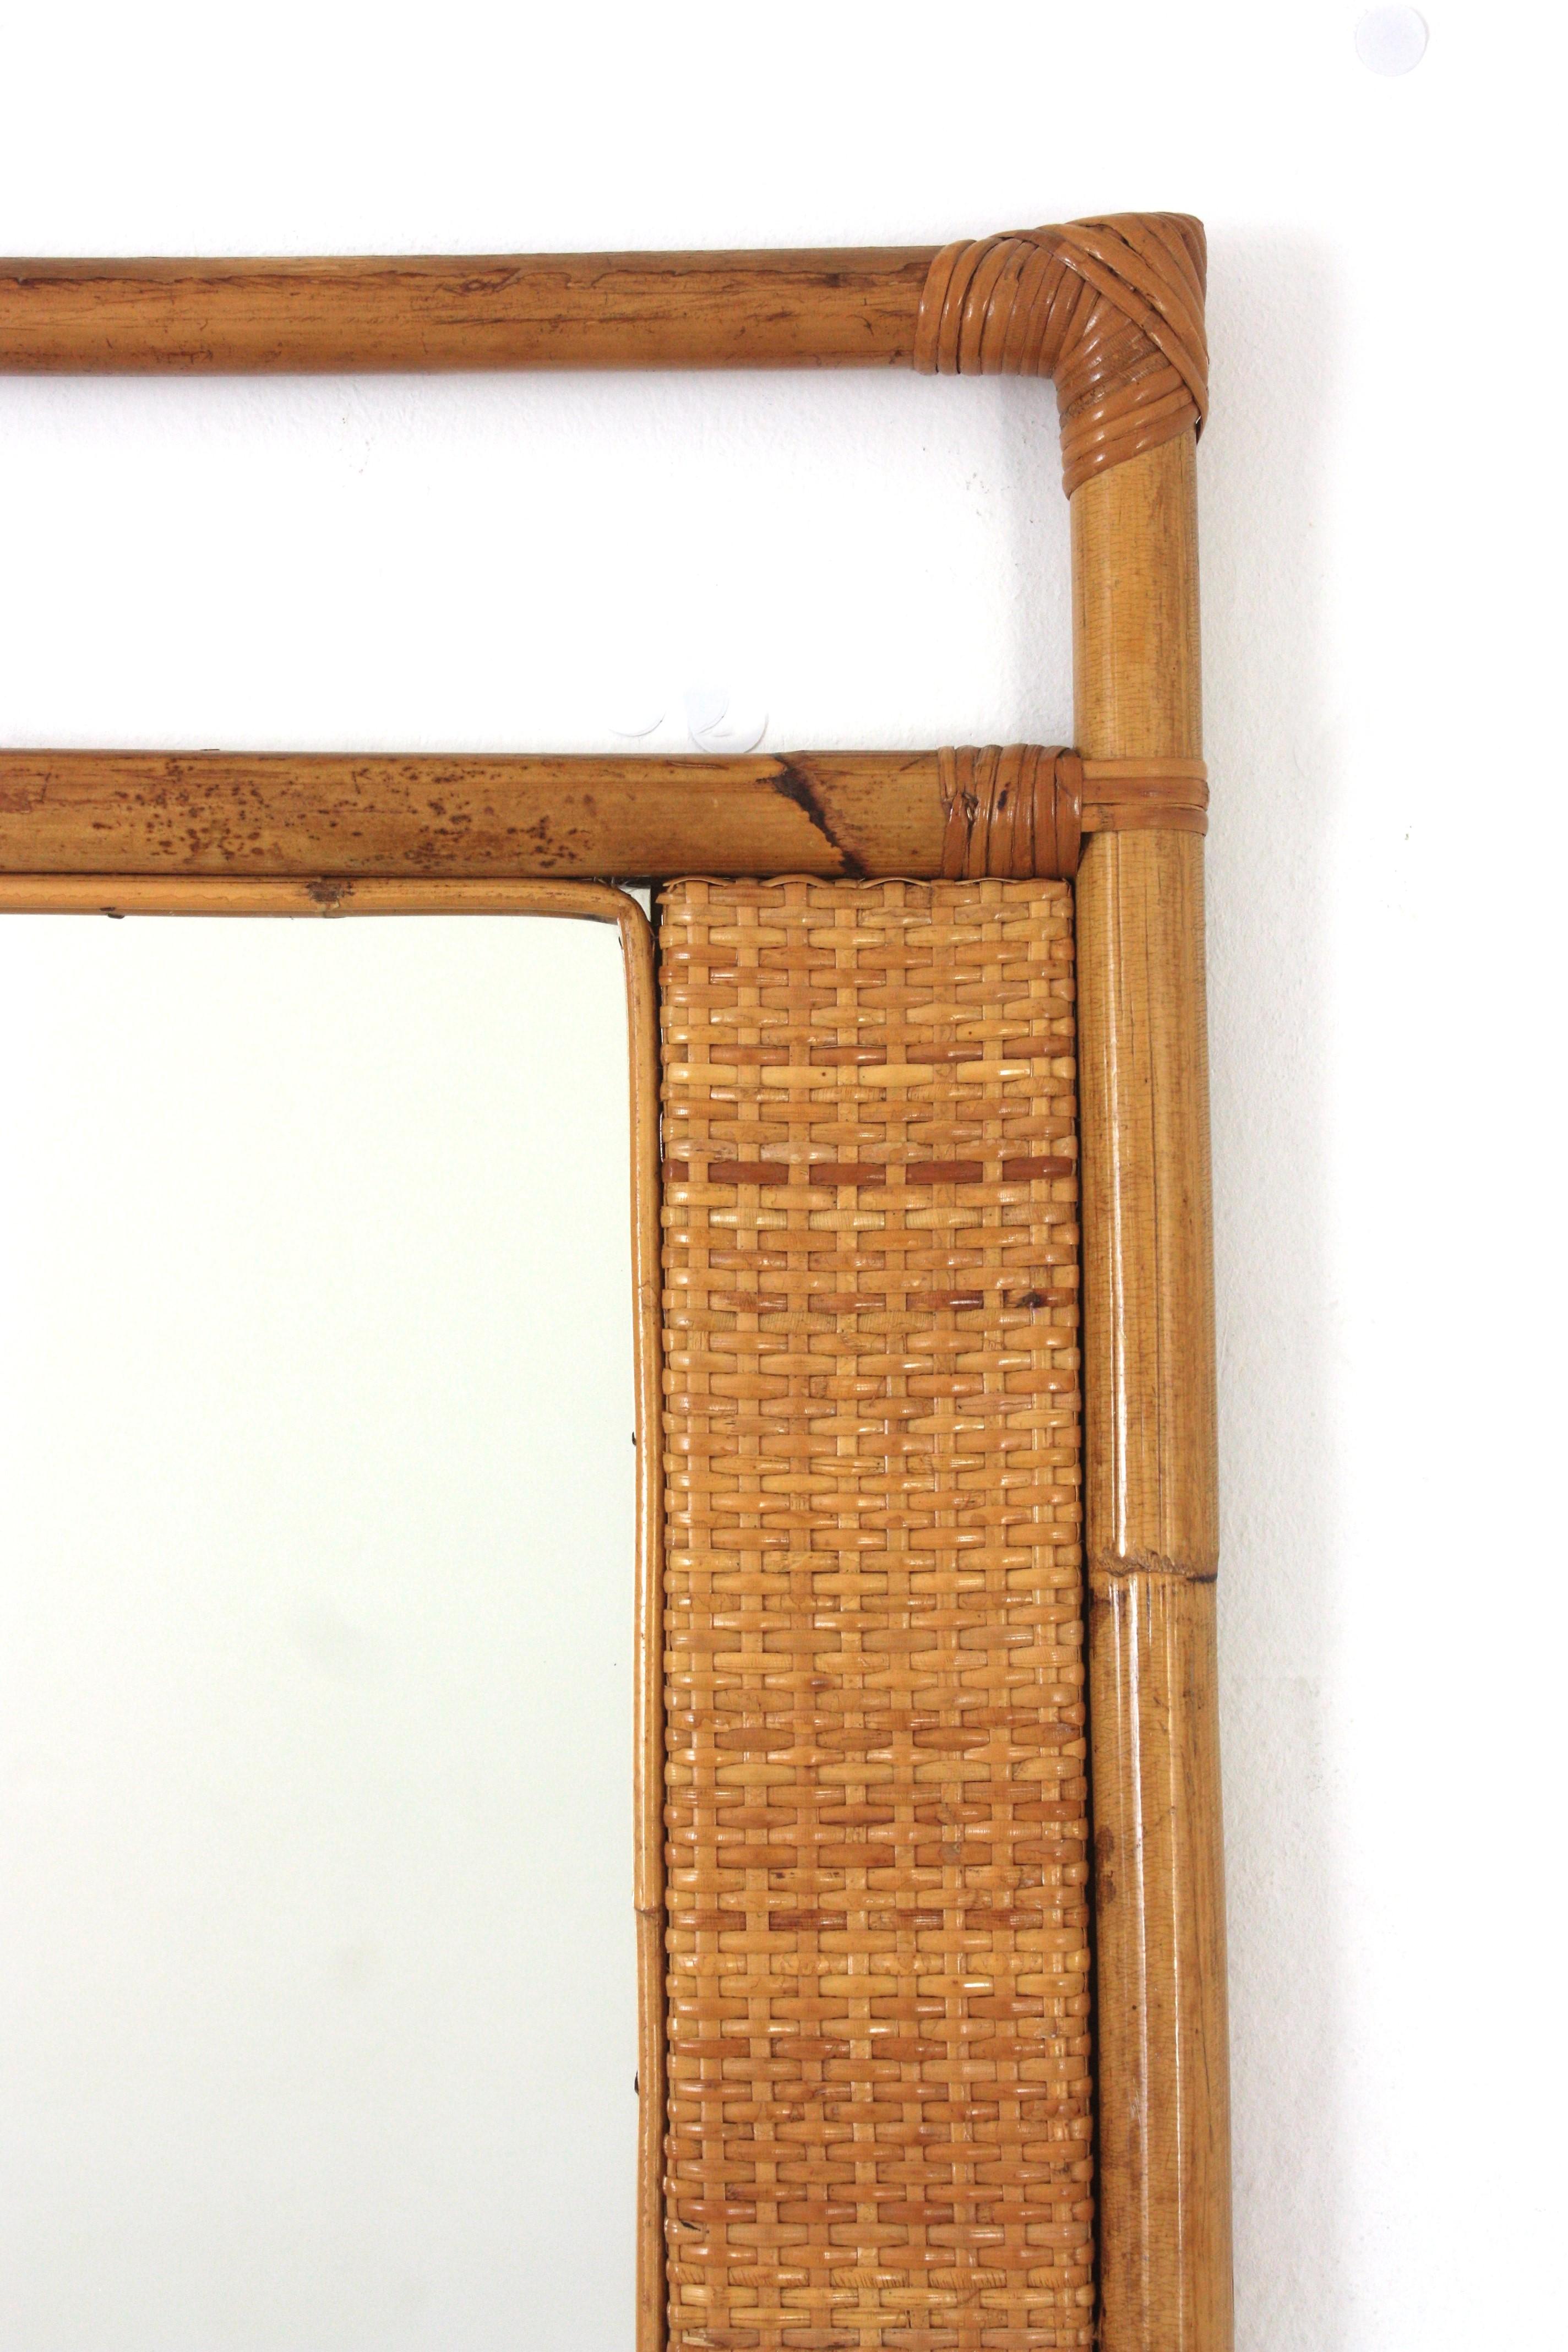 Spanish Rectangular Rattan Wall Mirror with Geometric Woven Frame For Sale 1